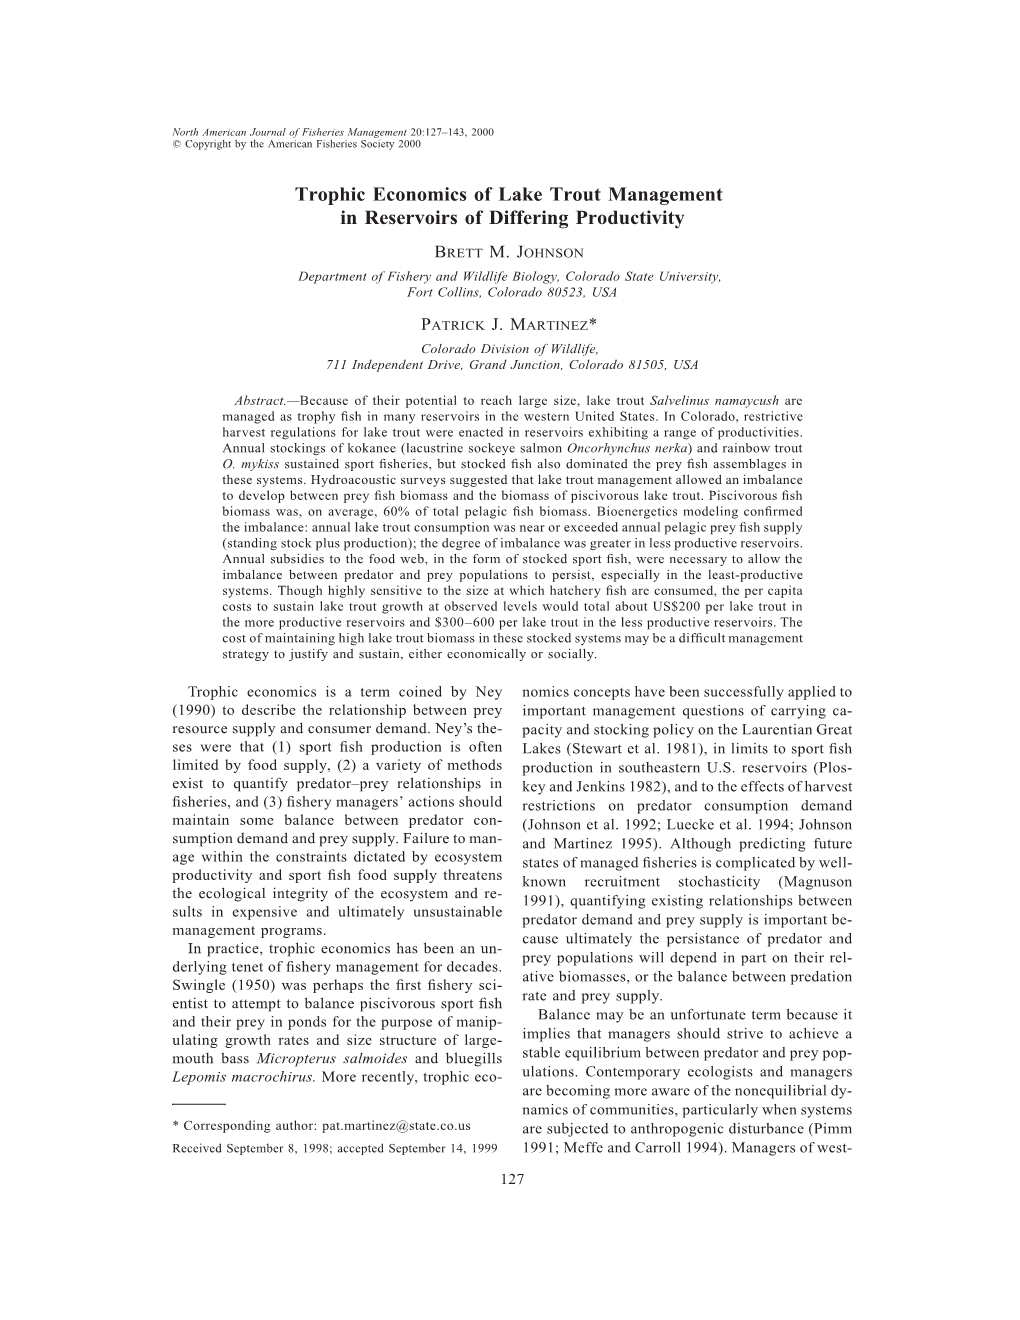 Trophic Economics of Lake Trout Management in Reservoirs of Differing Productivity